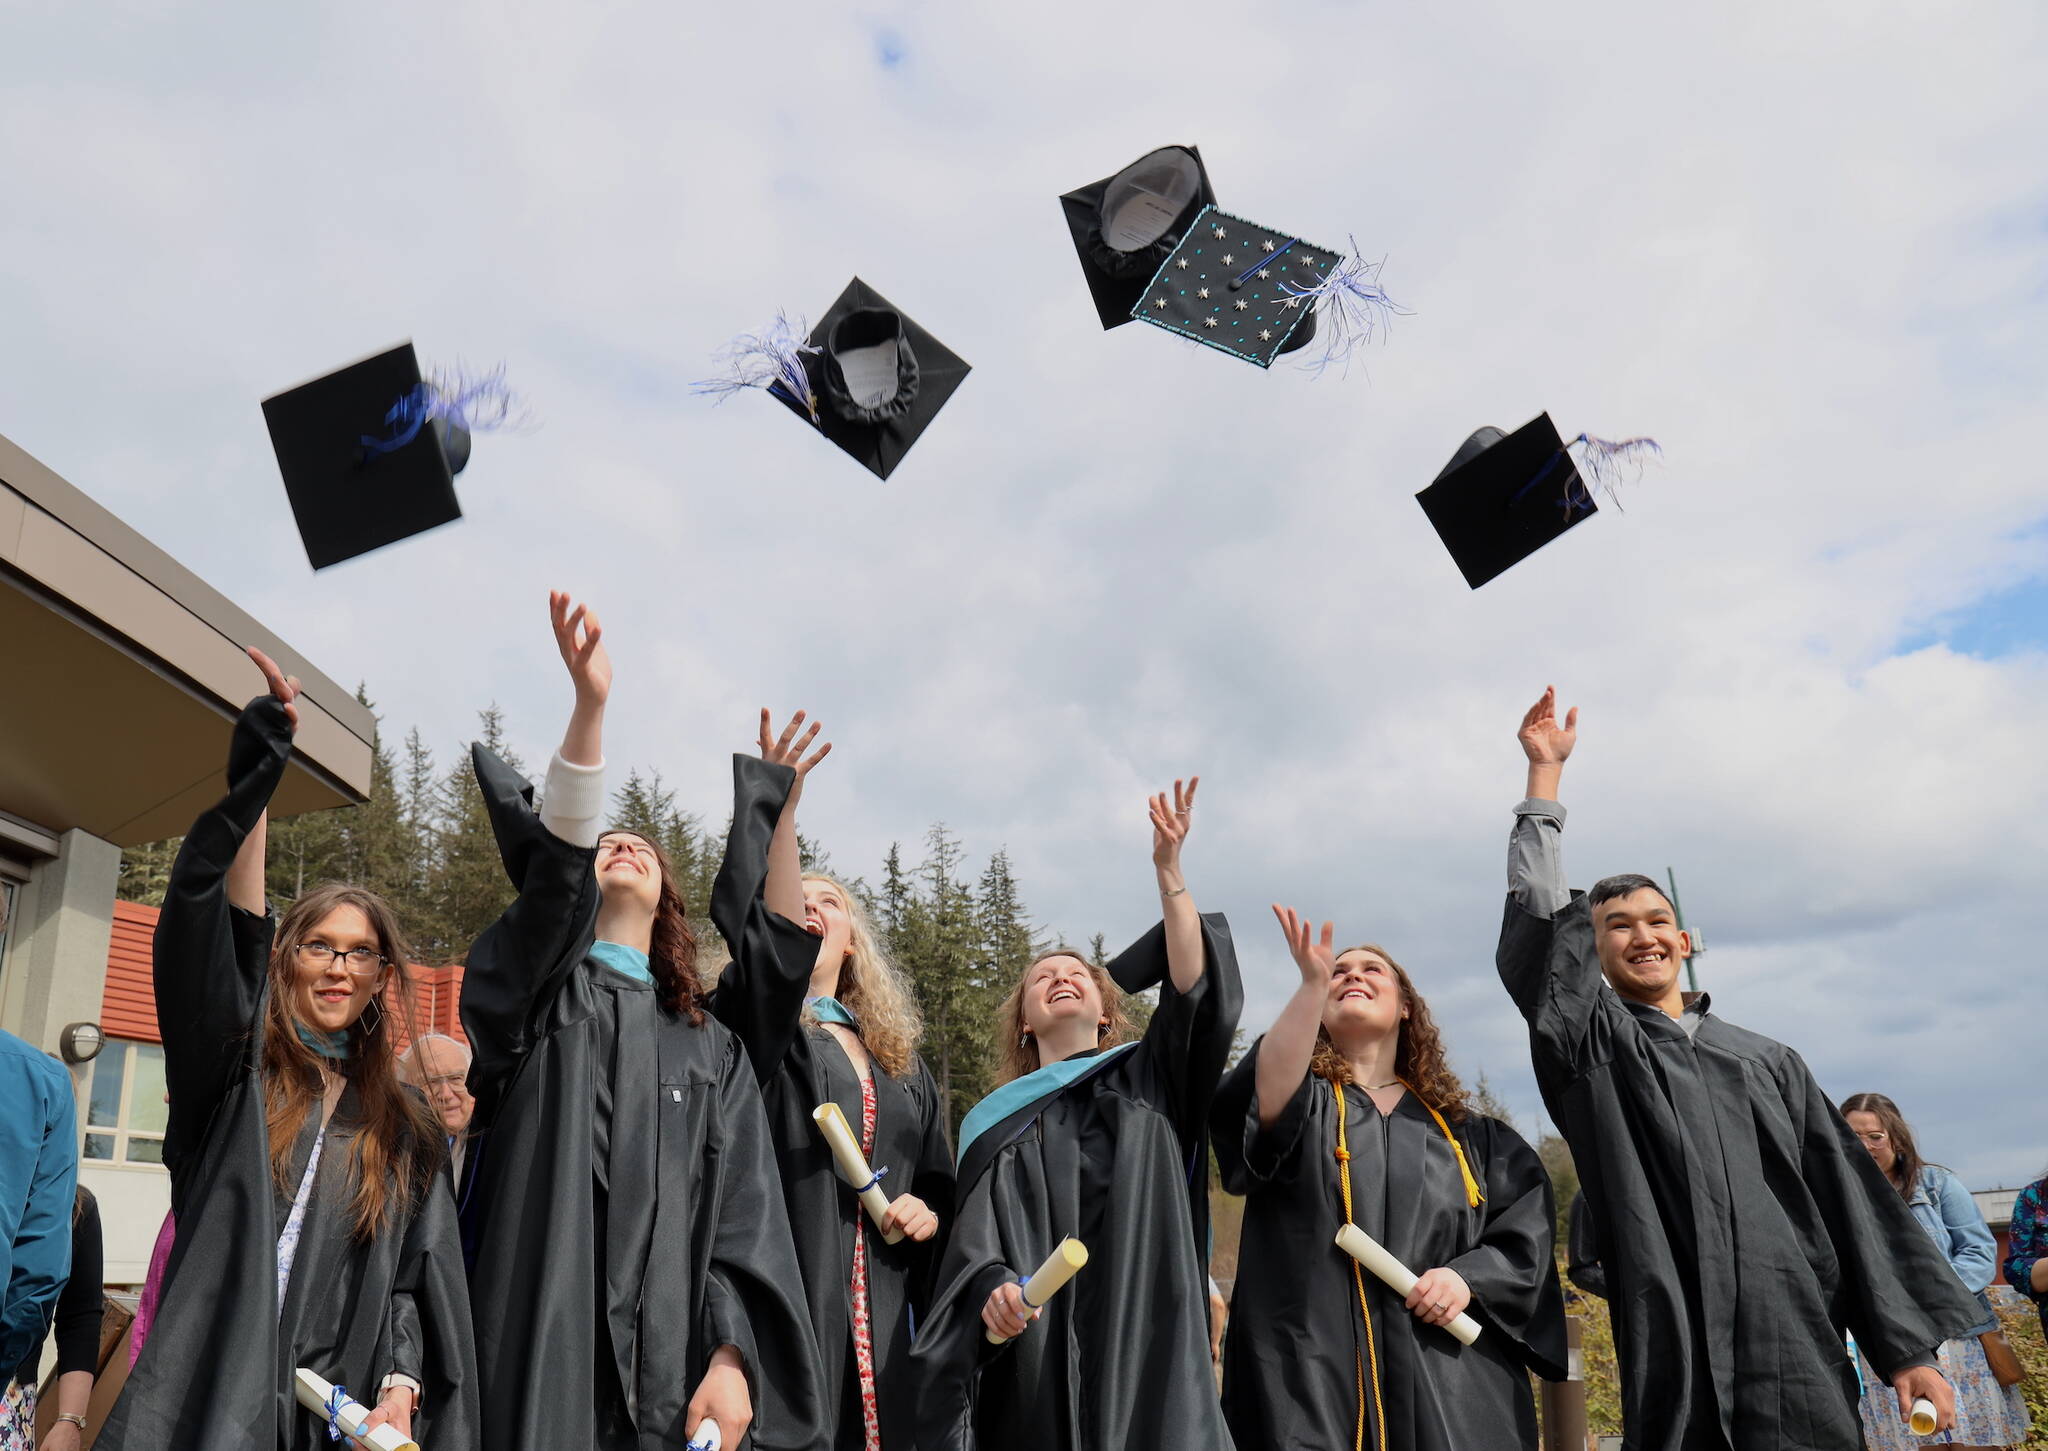 Graduates Emily Hatley, Lara Millette, Autumn Levy, Rosaline Westfall, Rylee Johnson and Jarvis Evans throw their caps in the air after their commencement ceremony held Sunday afternoon at the University of Alaska Southeast. (Clarise Larson / Juneau Empire)